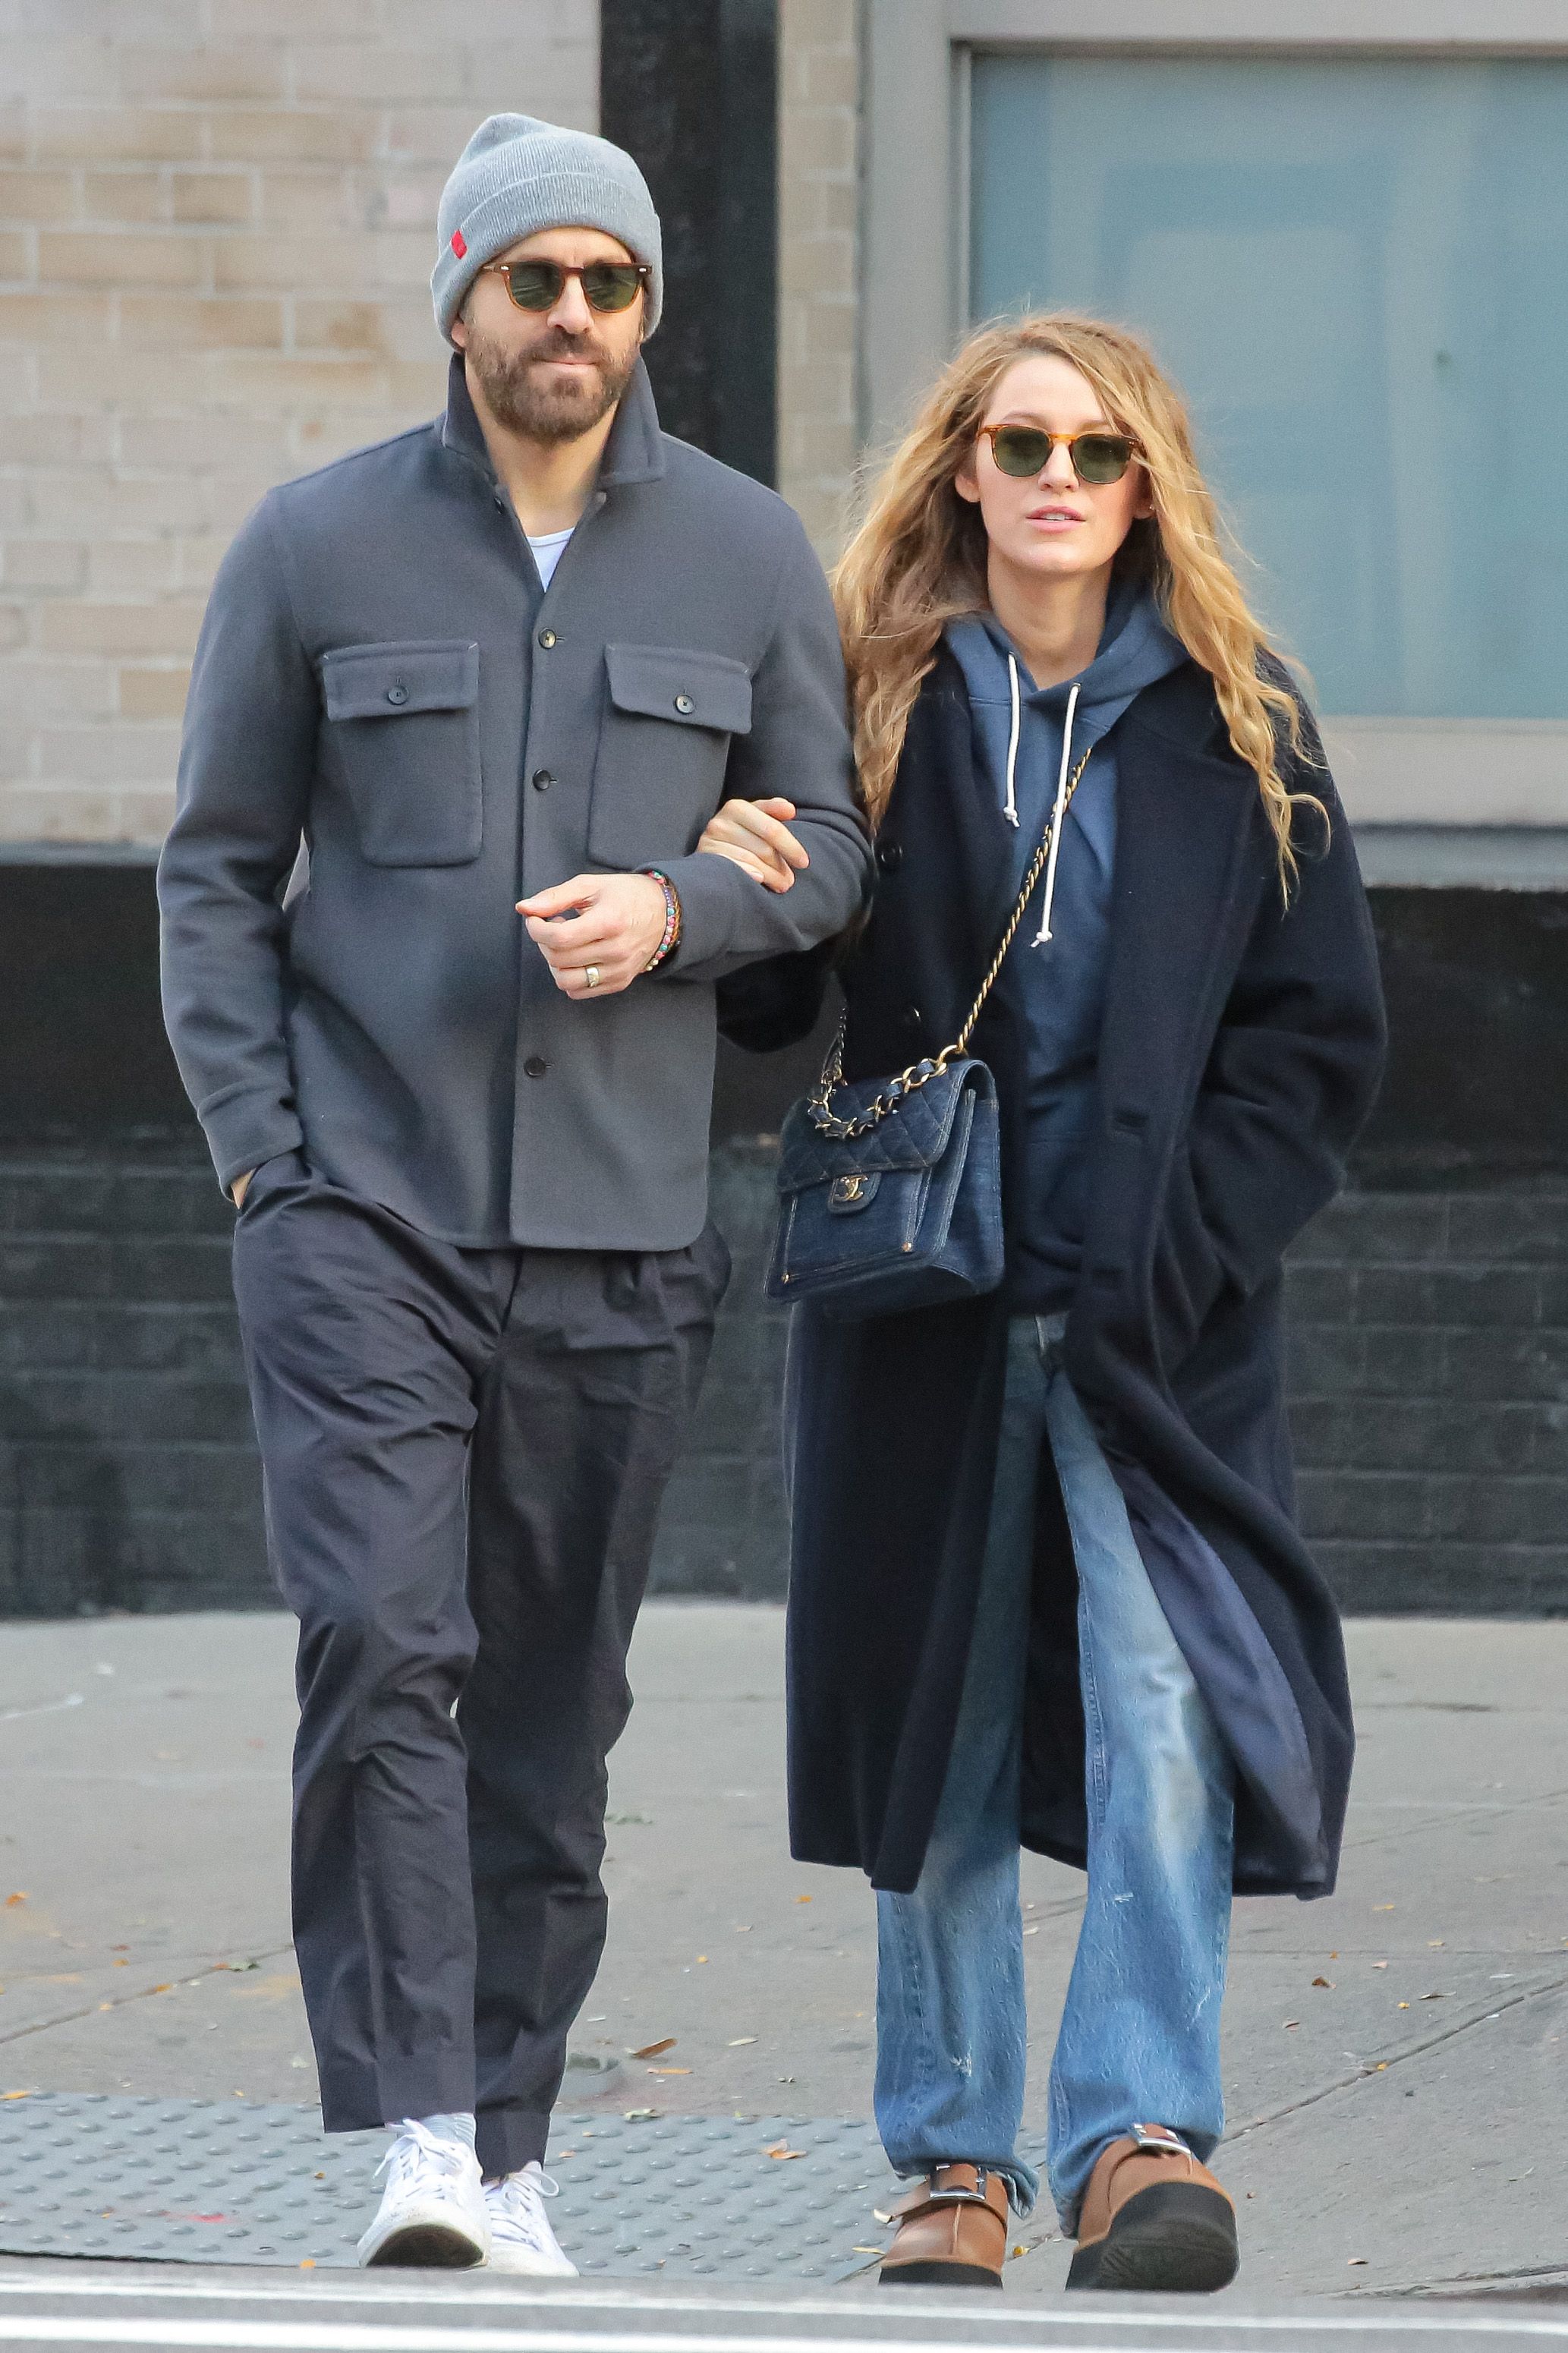 This Is The Important 'Rule' Blake Lively And Ryan Reynolds Outlined At The  Start Of Their Relationship, Blake Reveals - SHEfinds